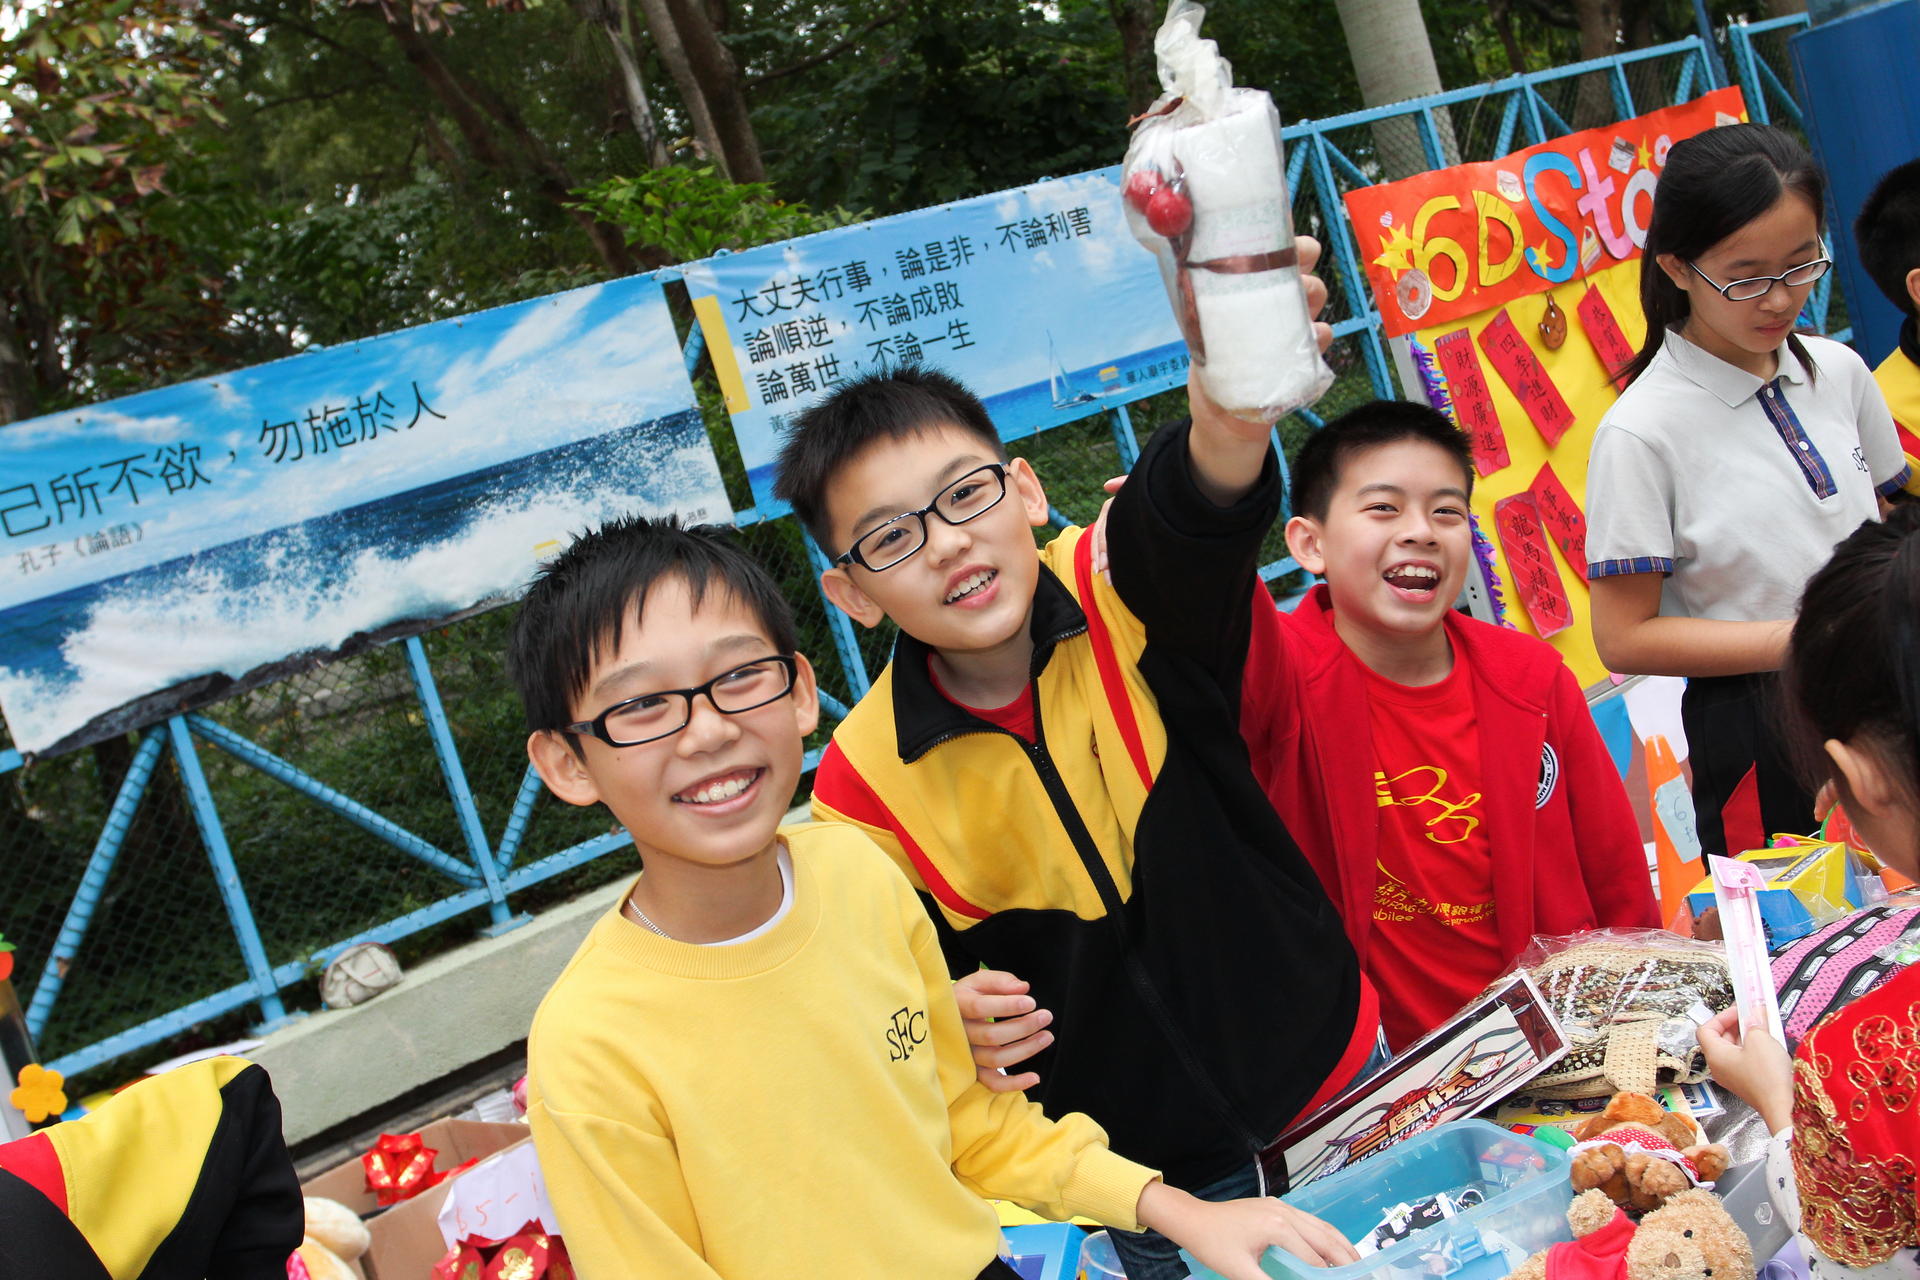 Students of Sun Fong Chung Primary School ran a market as a learning experience.